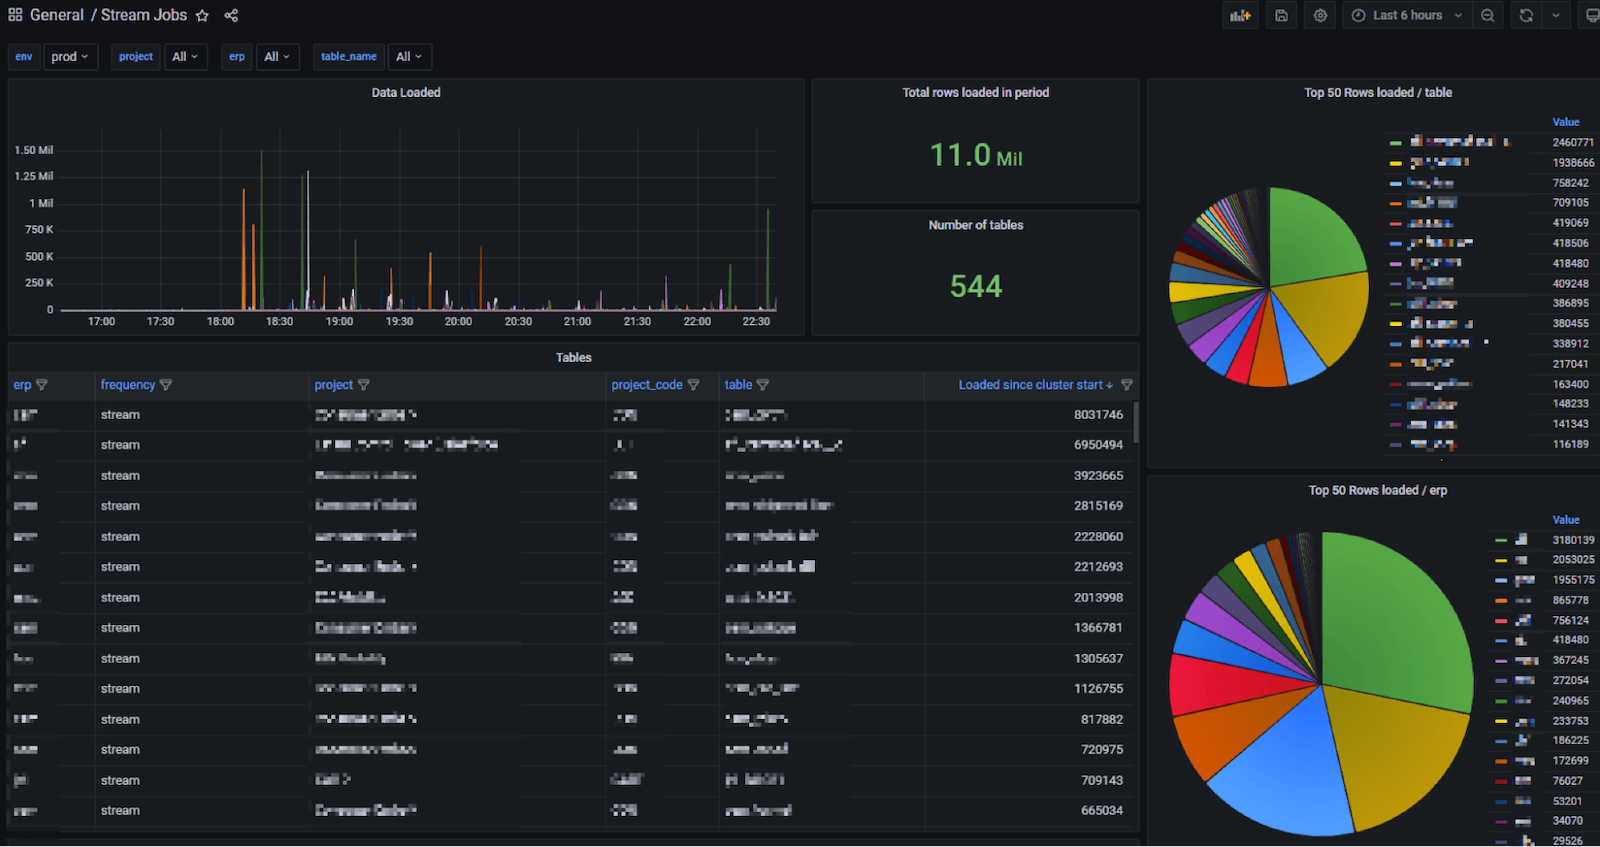 *Grafana dashboard showing distribution of table loads across source systems and projects*